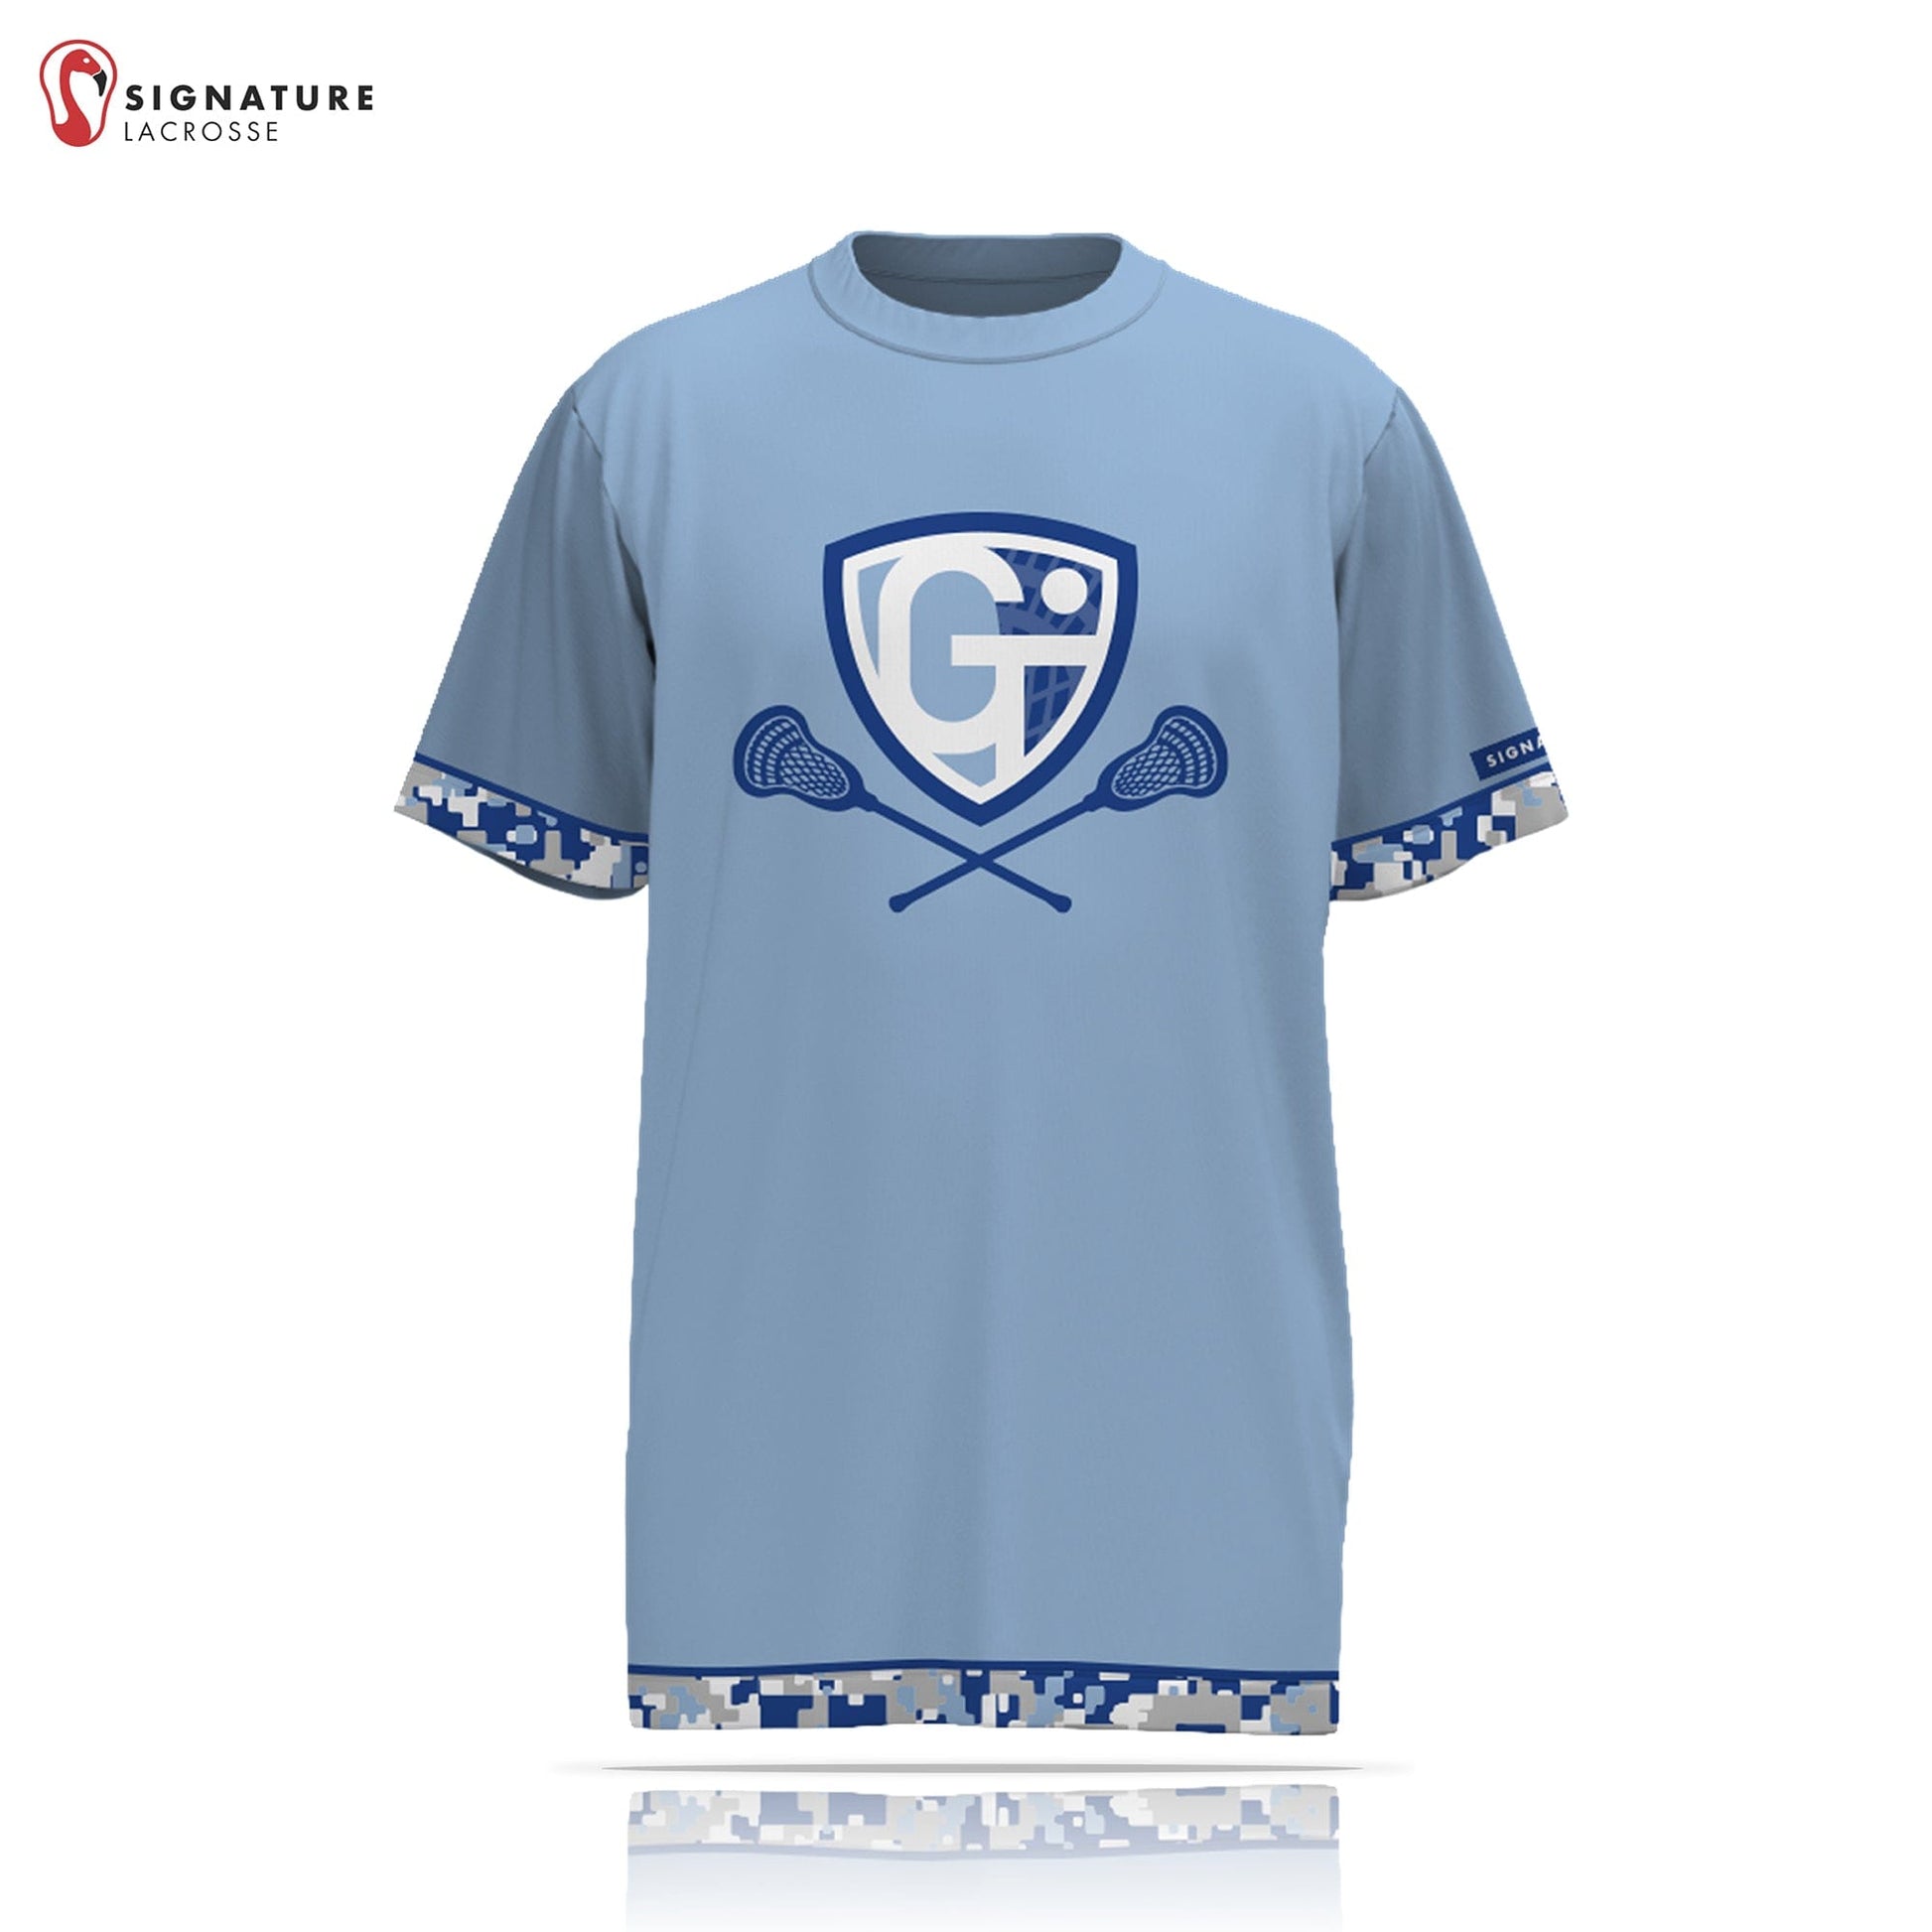 Georgetown-Triton Youth Lacrosse Player Short Sleeve Shooting Shirt: 1-2 Signature Lacrosse